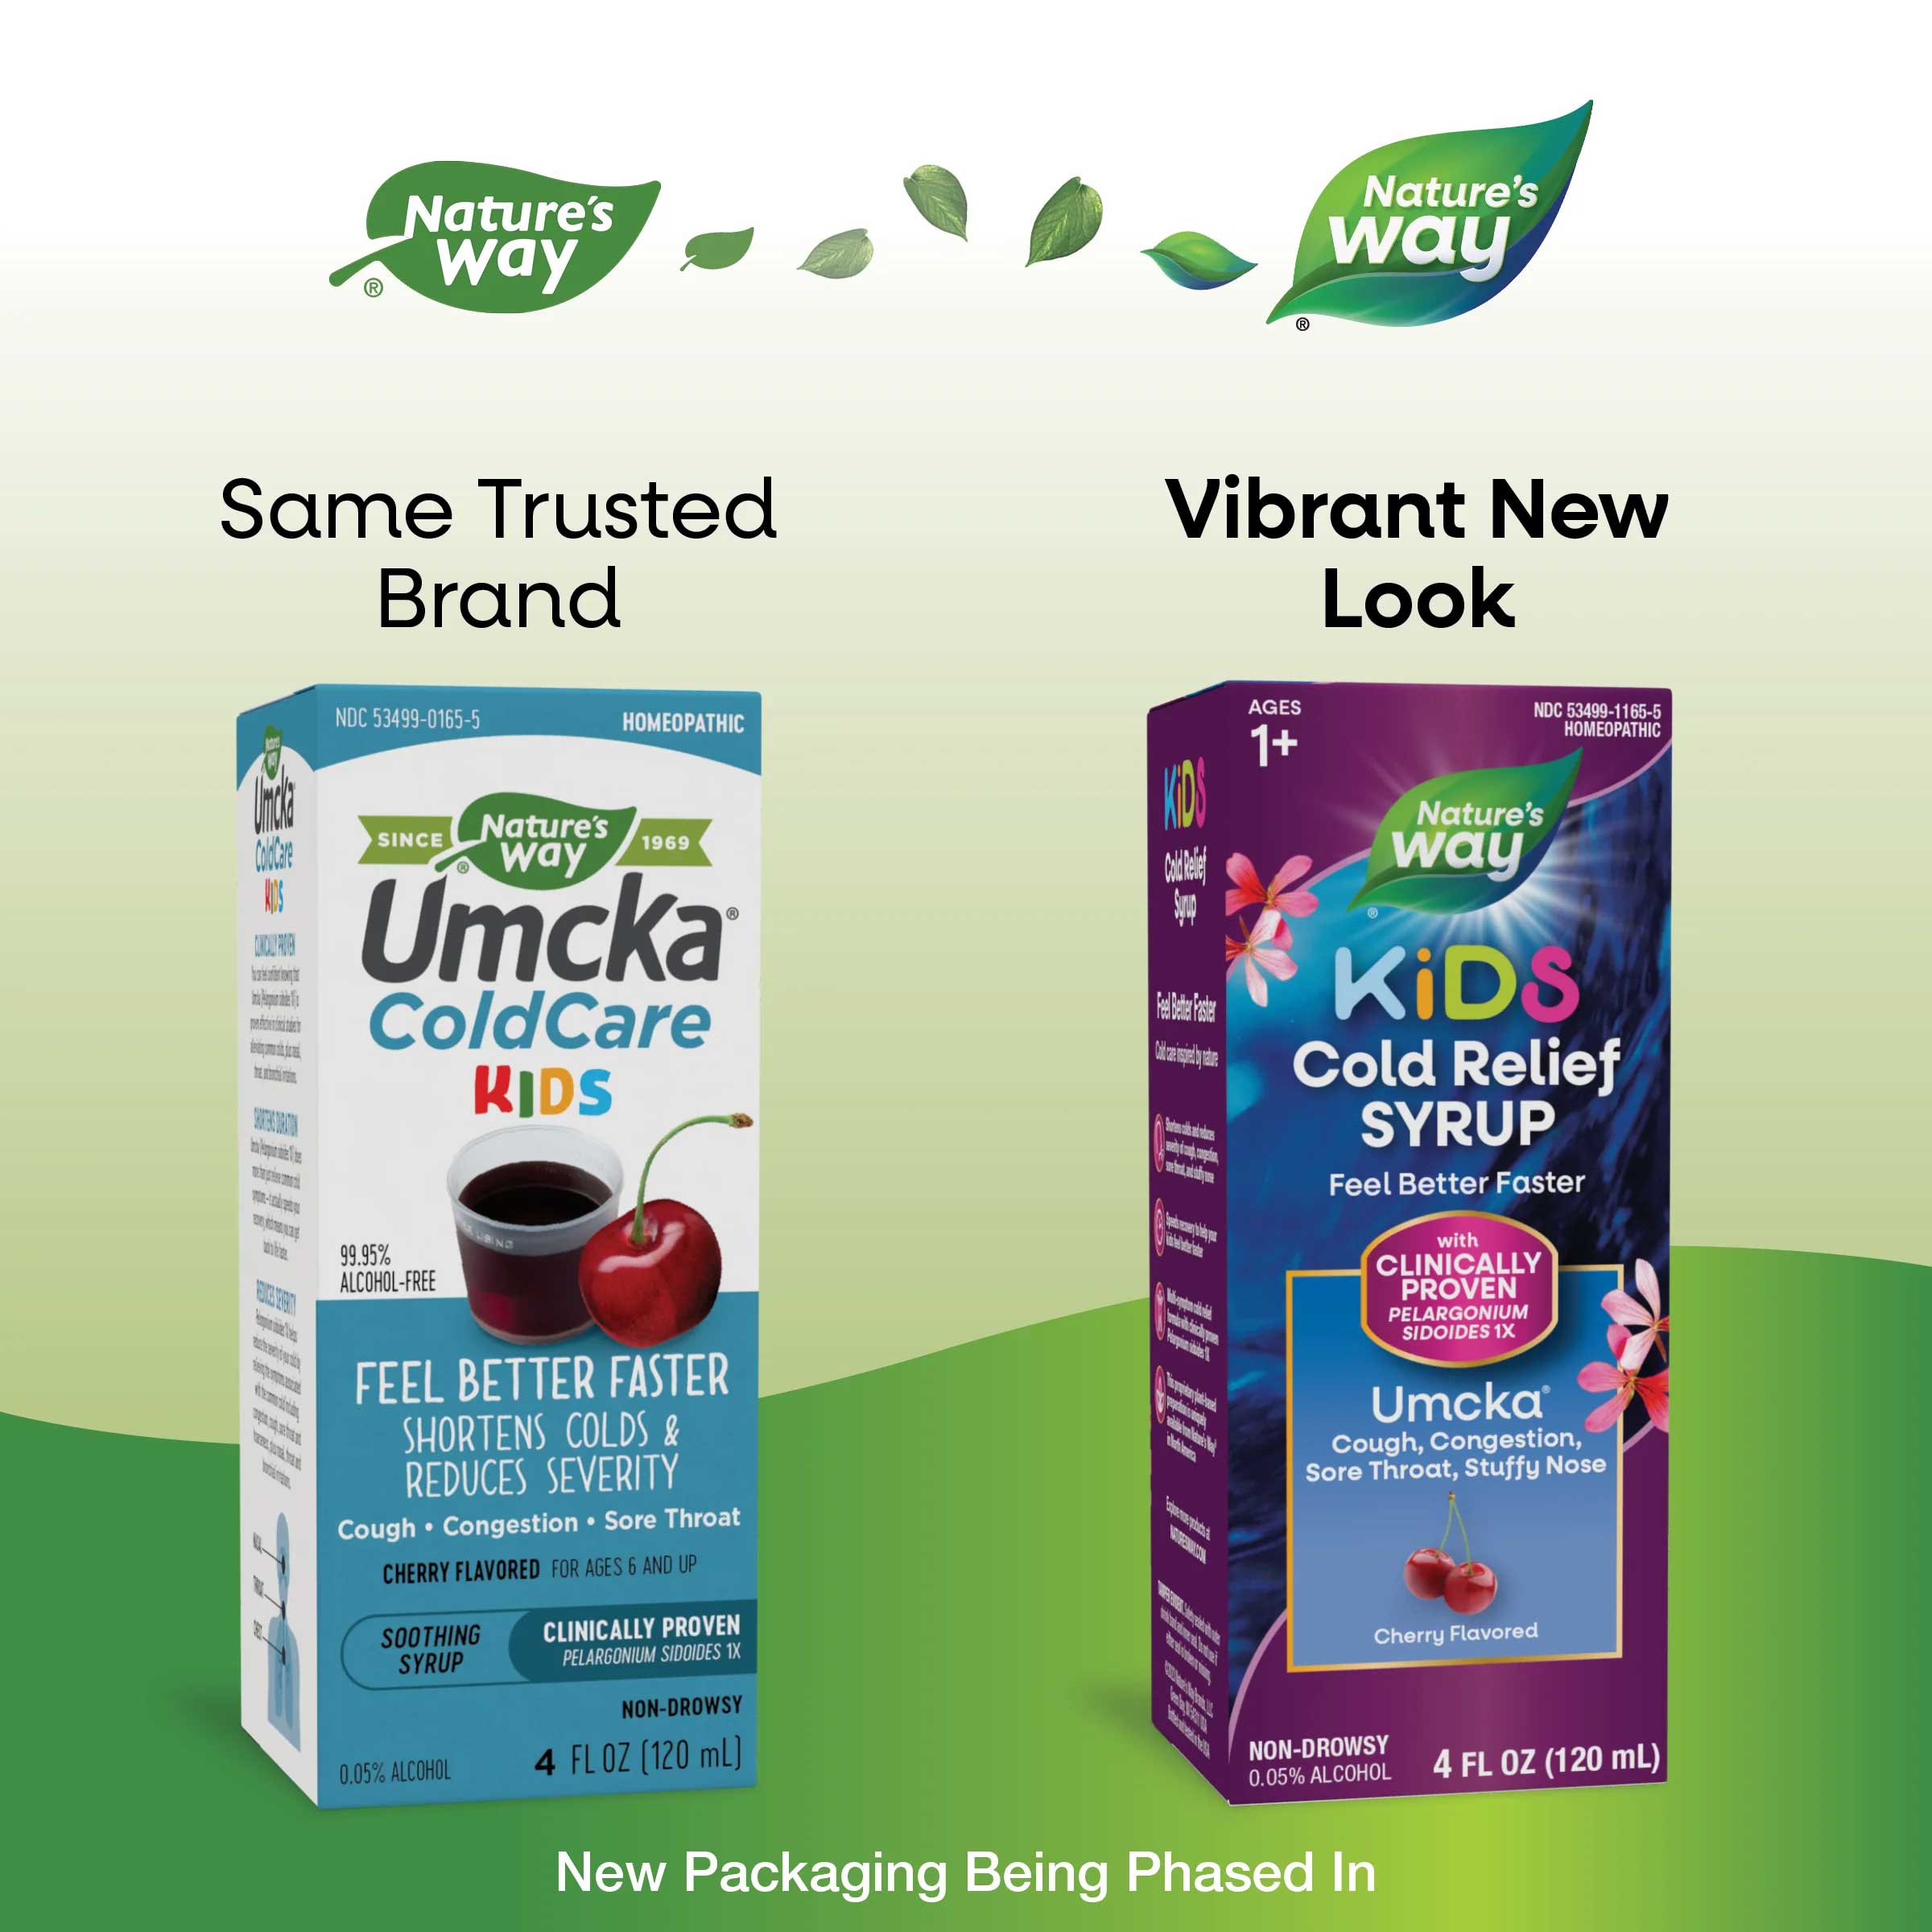 Nature's Way Umcka Kids Cold Relief Syrup New Look